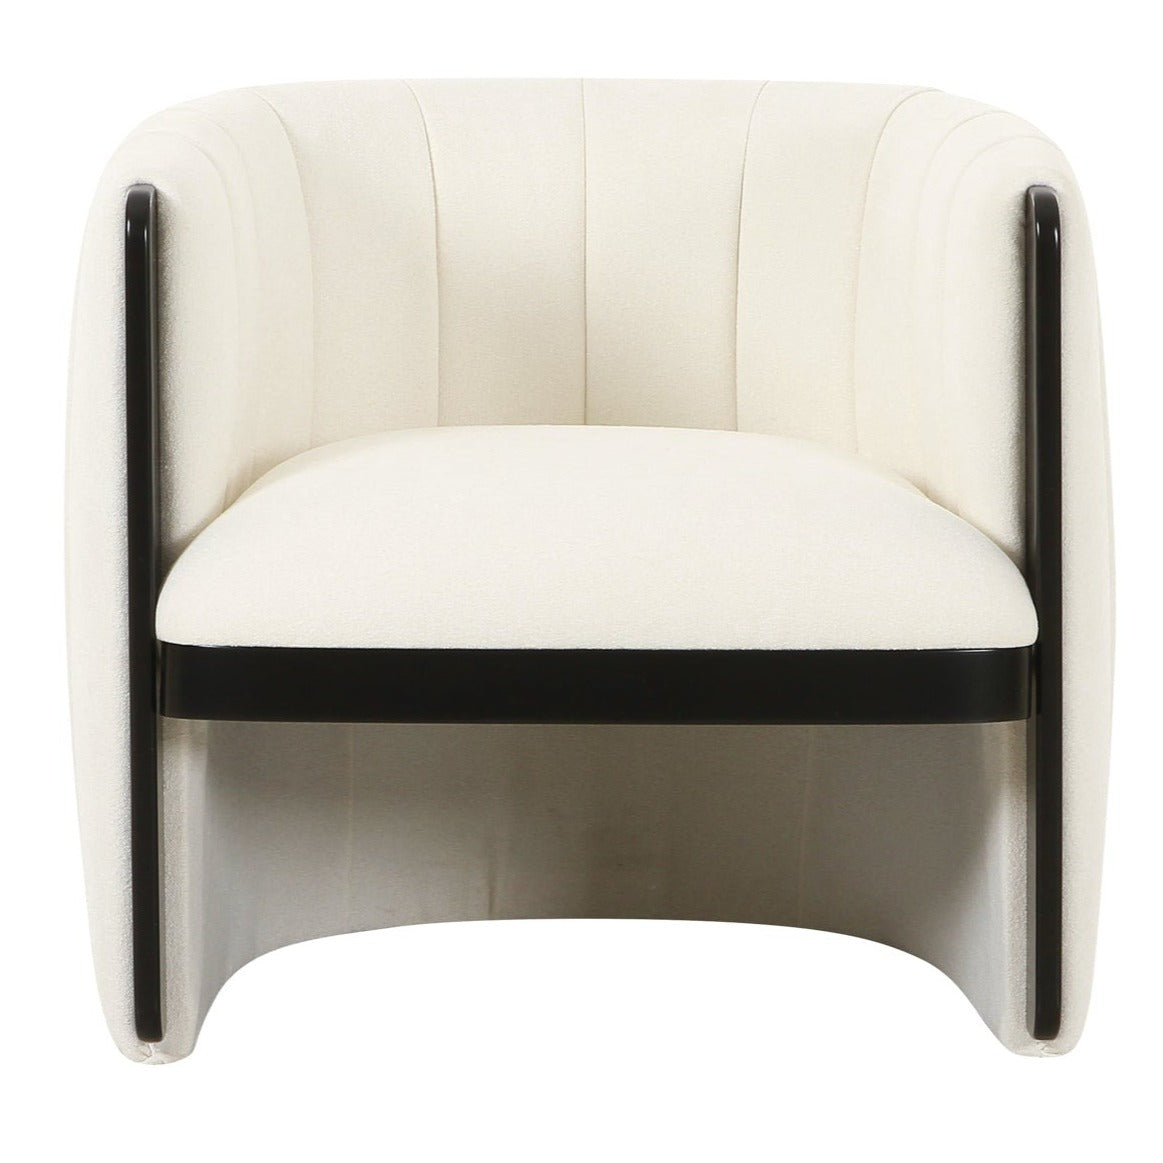 Fresno Accent Chair